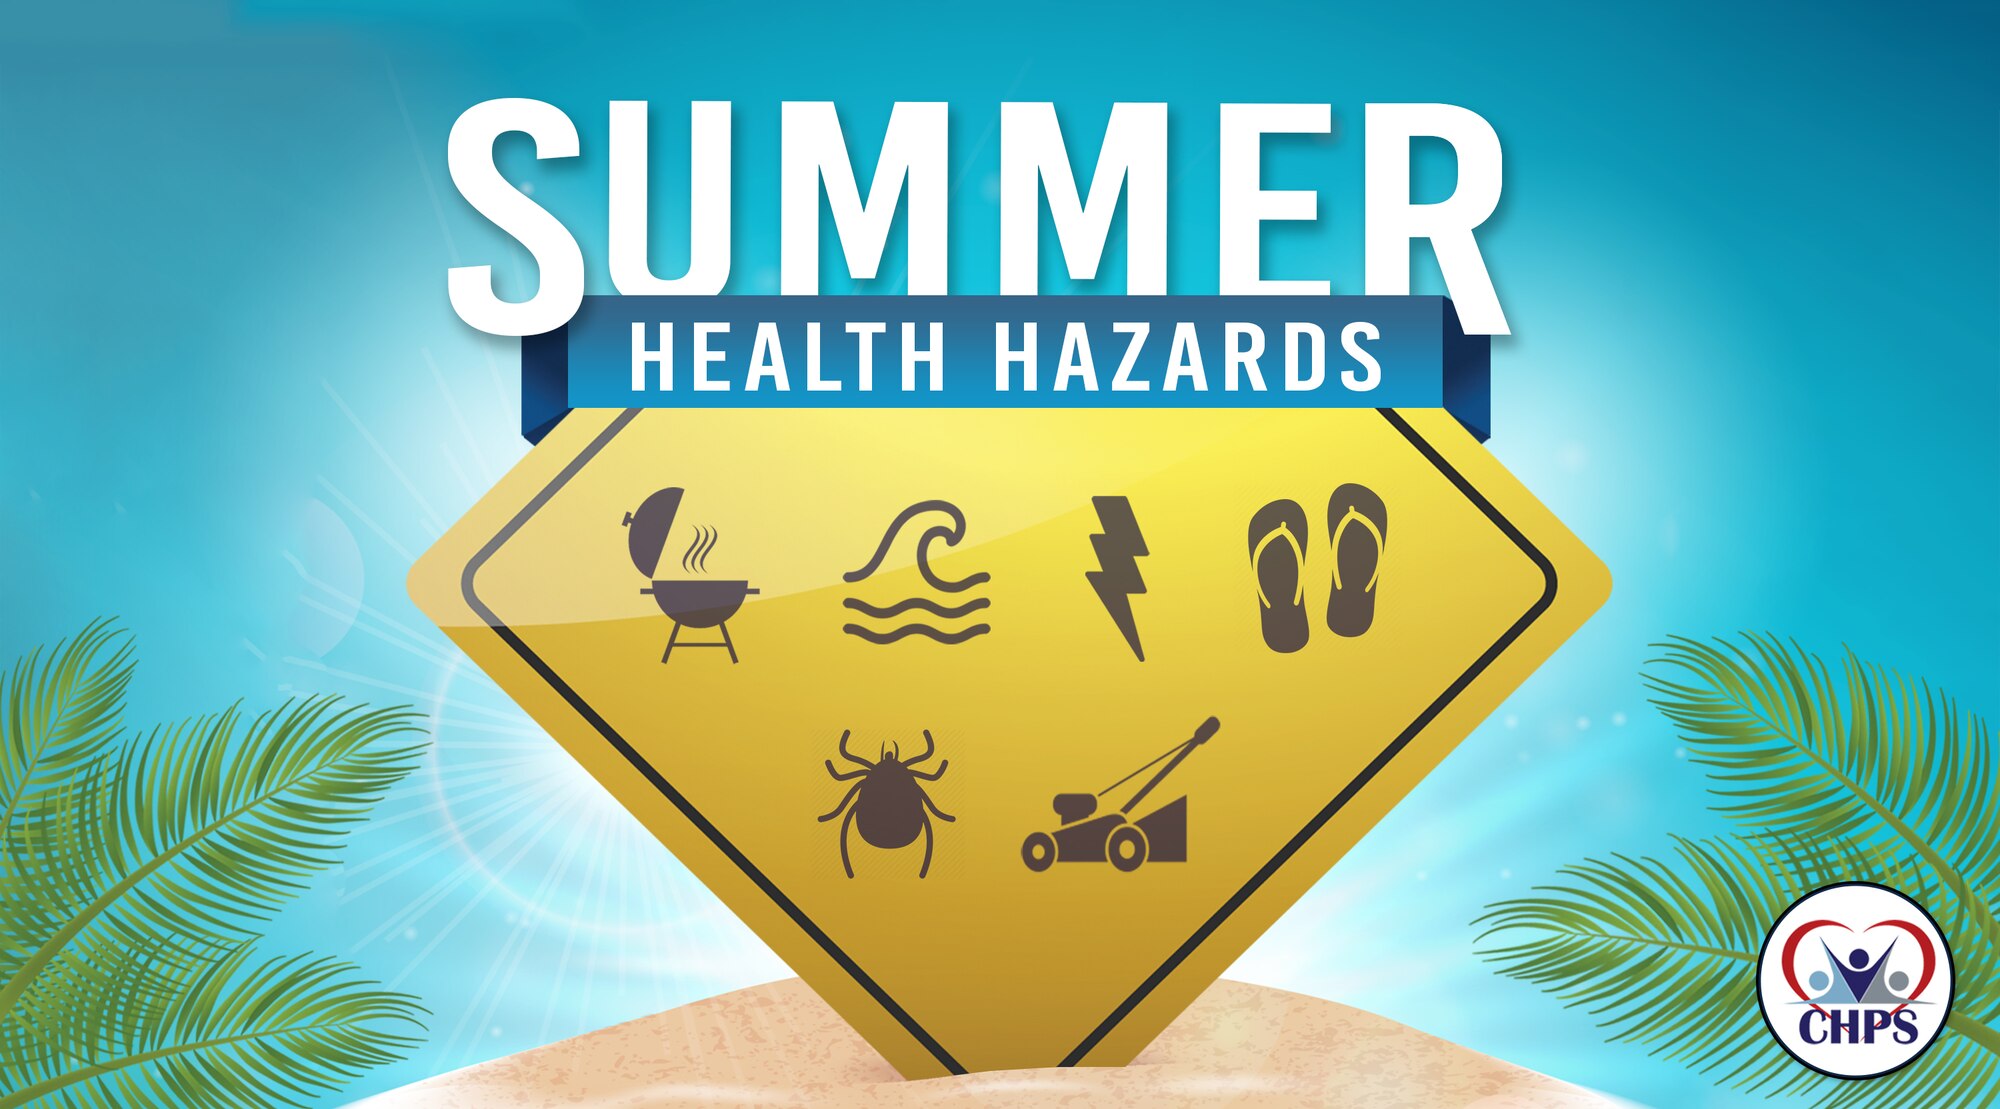 Summer fun like swimming, hiking, and longer days can present health risks, but don’t let a health emergency ruin your summer fun. Knowing common summer health hazards can help provide that safety net for you and your family.